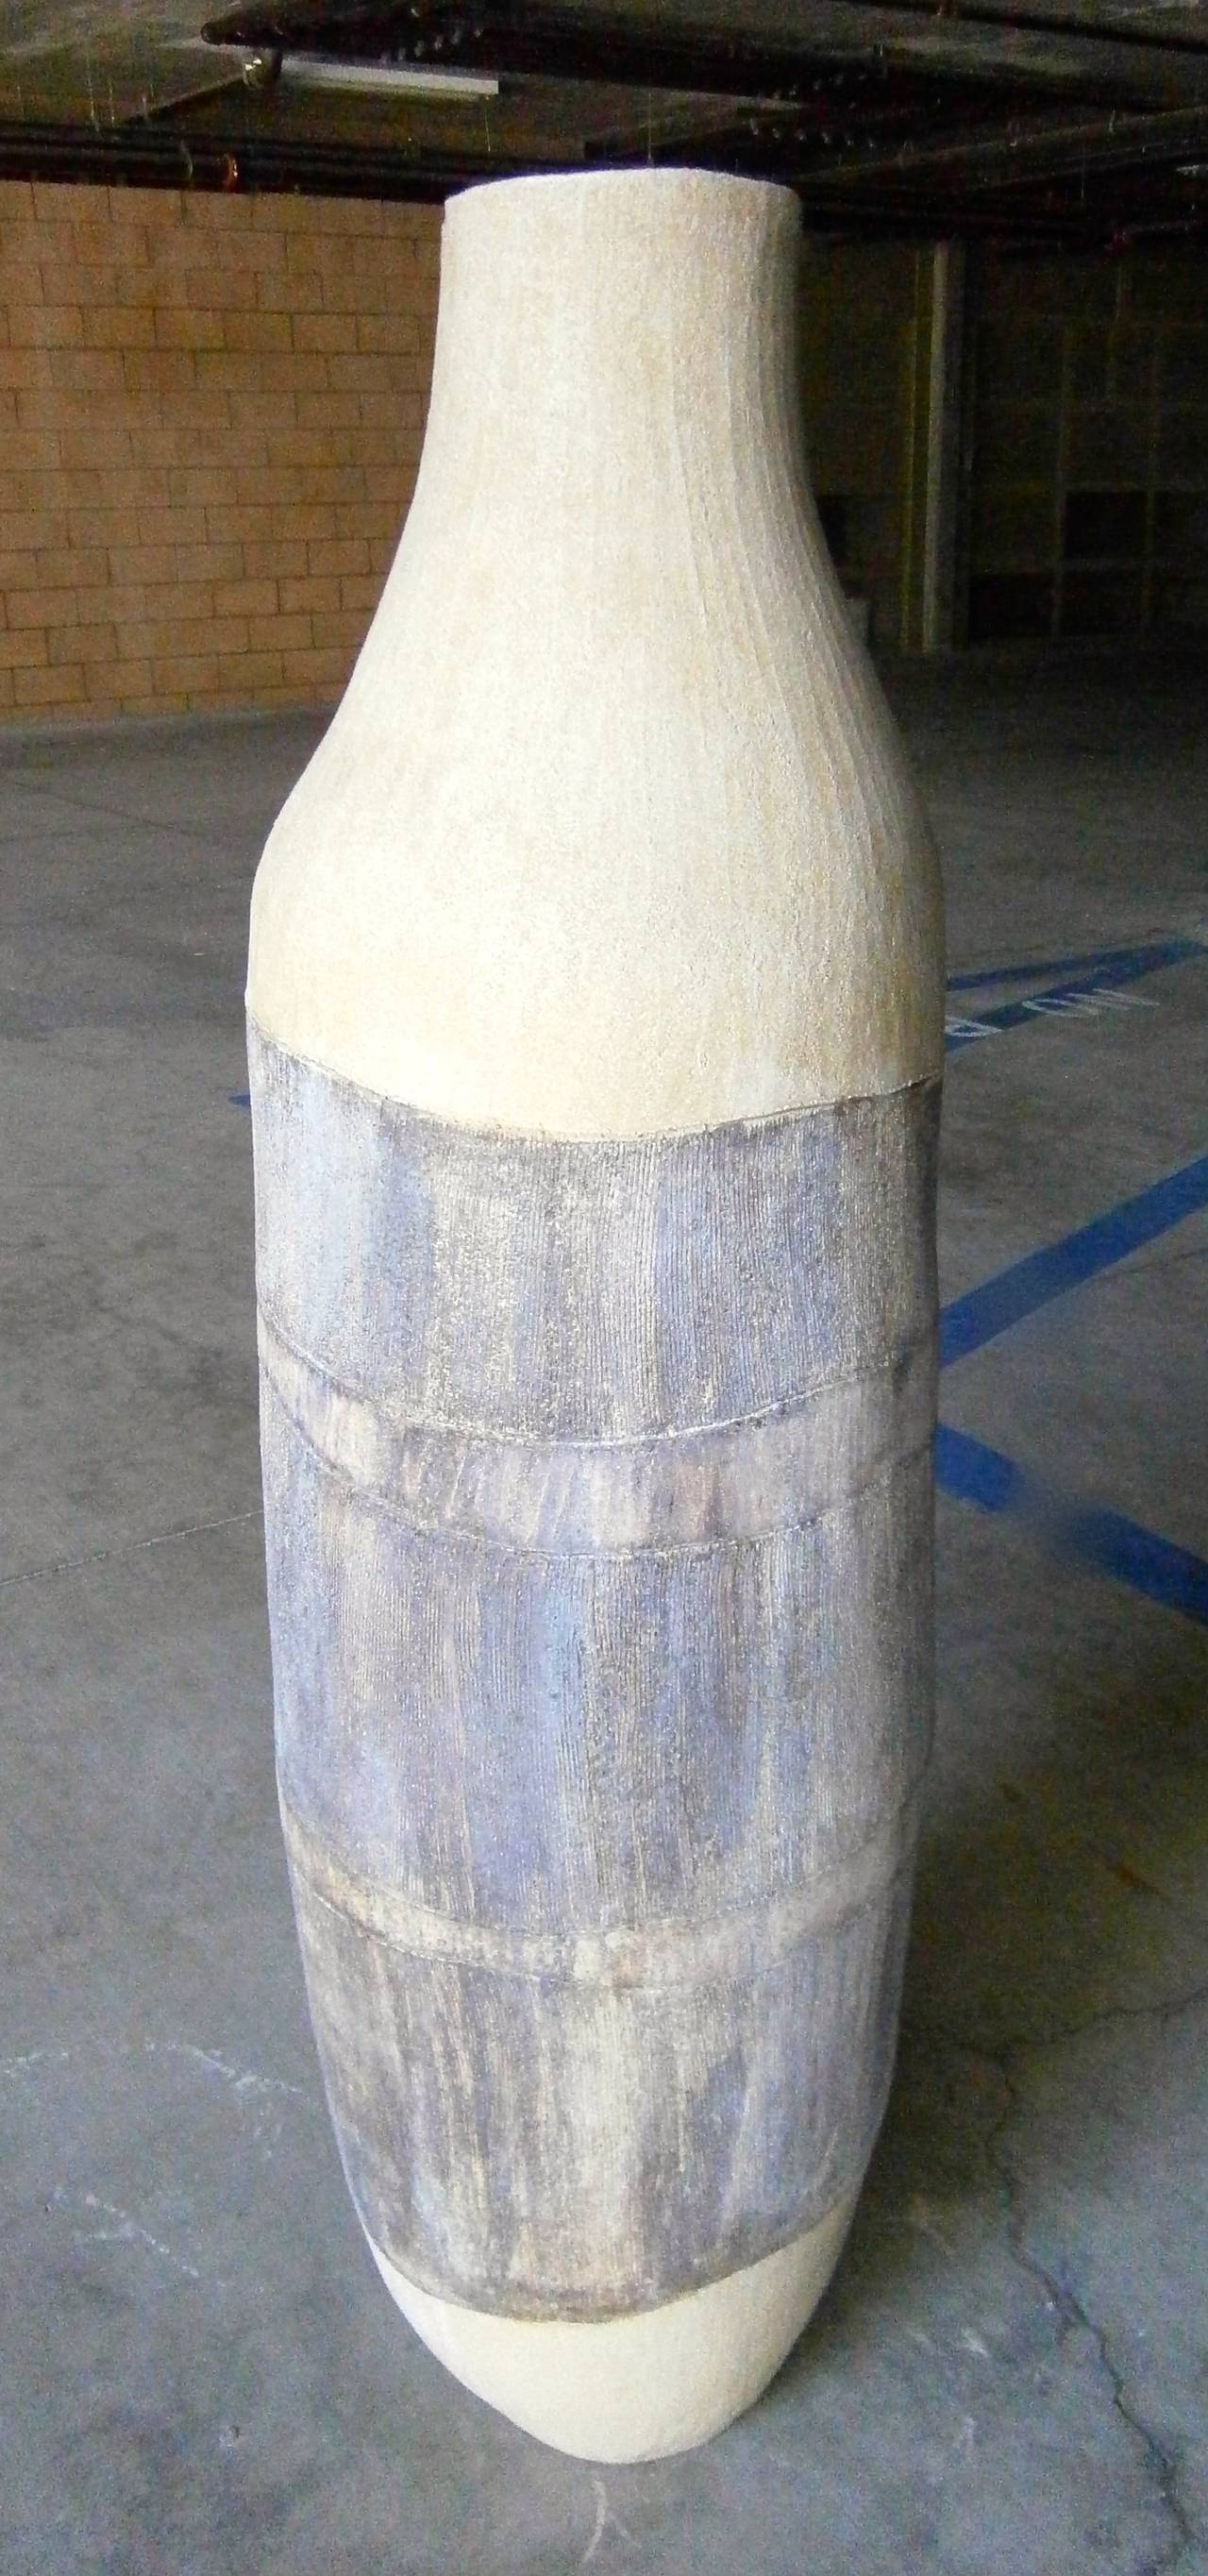 A large scaled studio pottery ceramic floor vase, custom made for noted interior designer Steve Chase and acquired from a home designed by him in 1994. This piece was obtained along with another large pottery vase that is signed JW '94 and can be